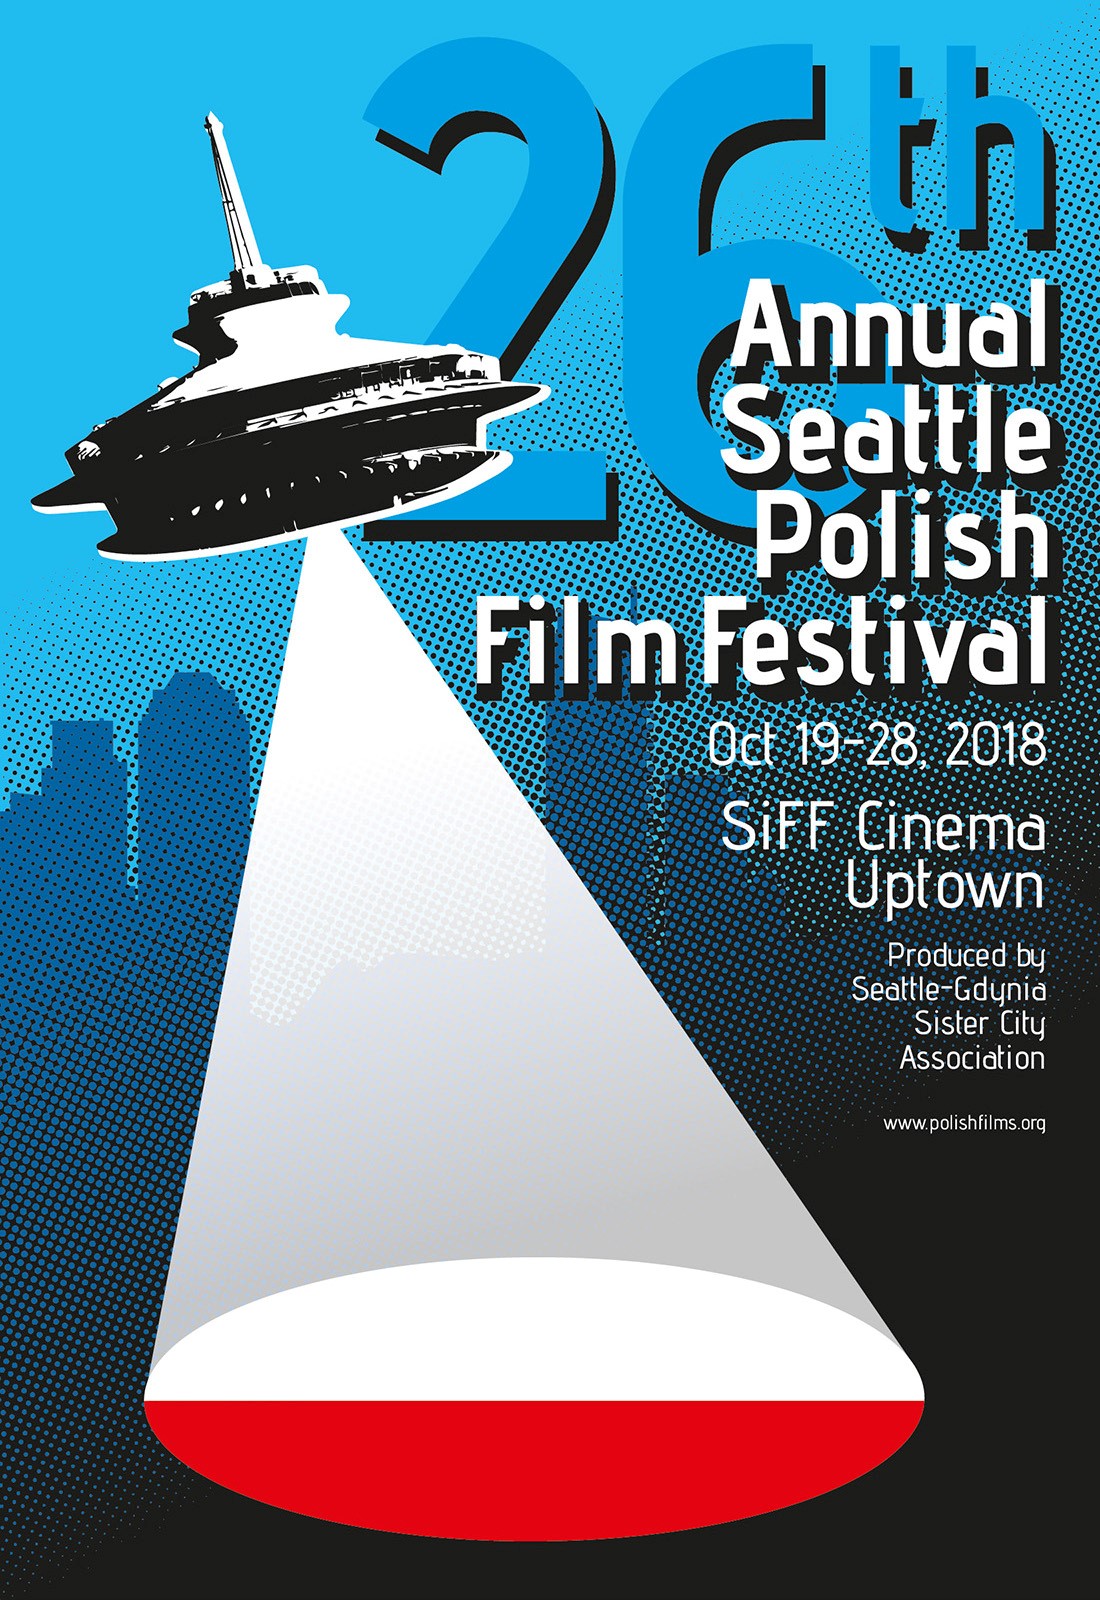 The 26th annual Seattle Polish Film Festival is coming soon!